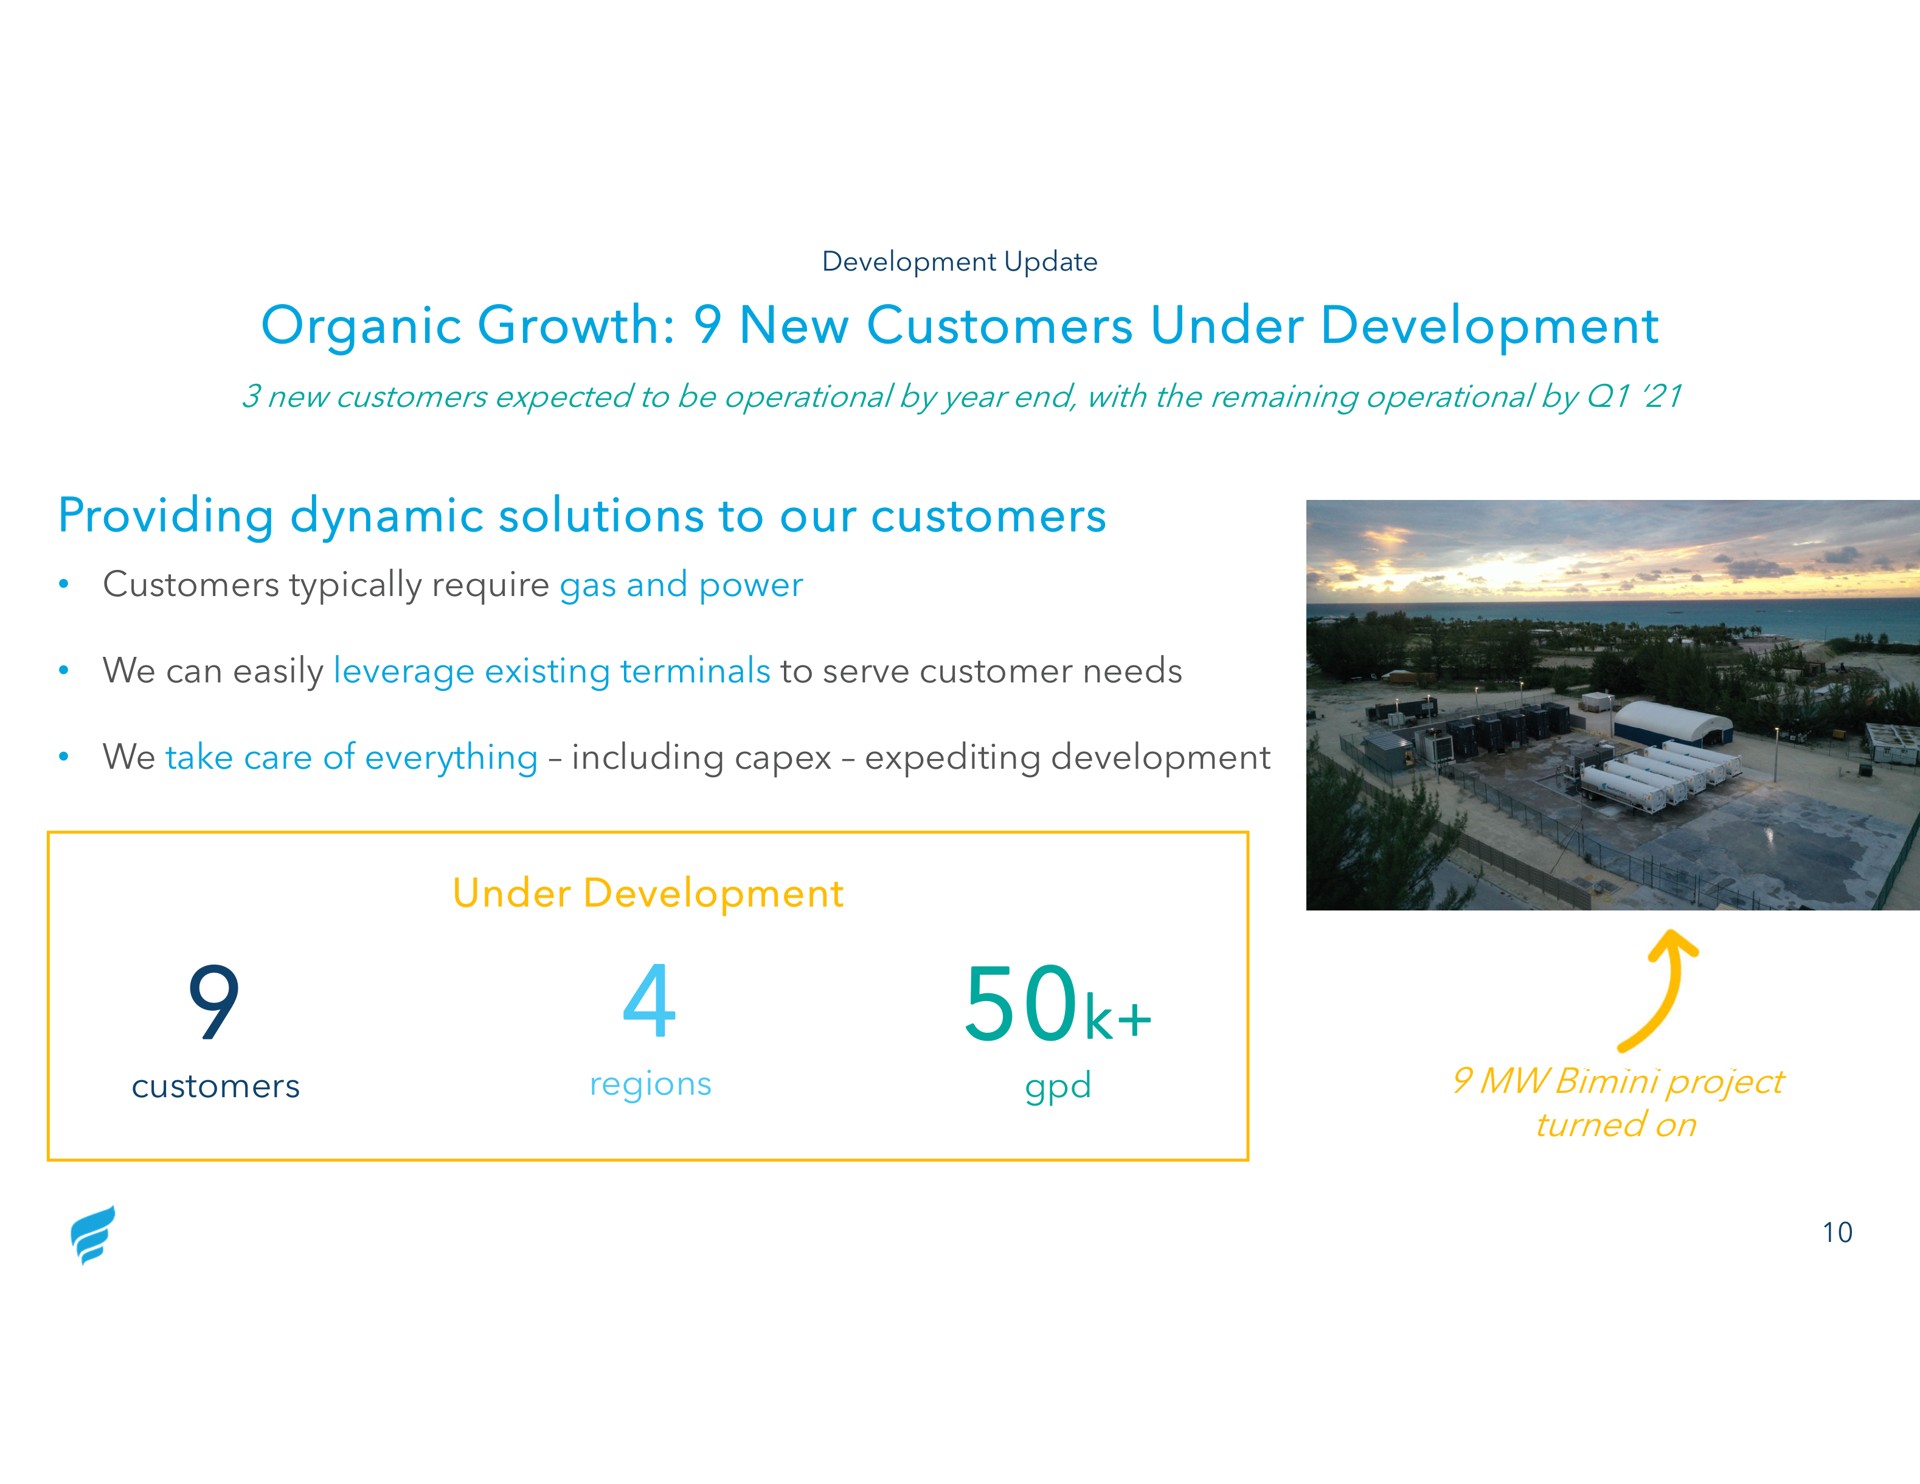 organic growth new customers under development providing dynamic solutions to our customers customers typically require gas and power we can easily leverage existing terminals to serve customer needs we take care of everything including expediting development under development customers regions project turned on | NewFortress Energy